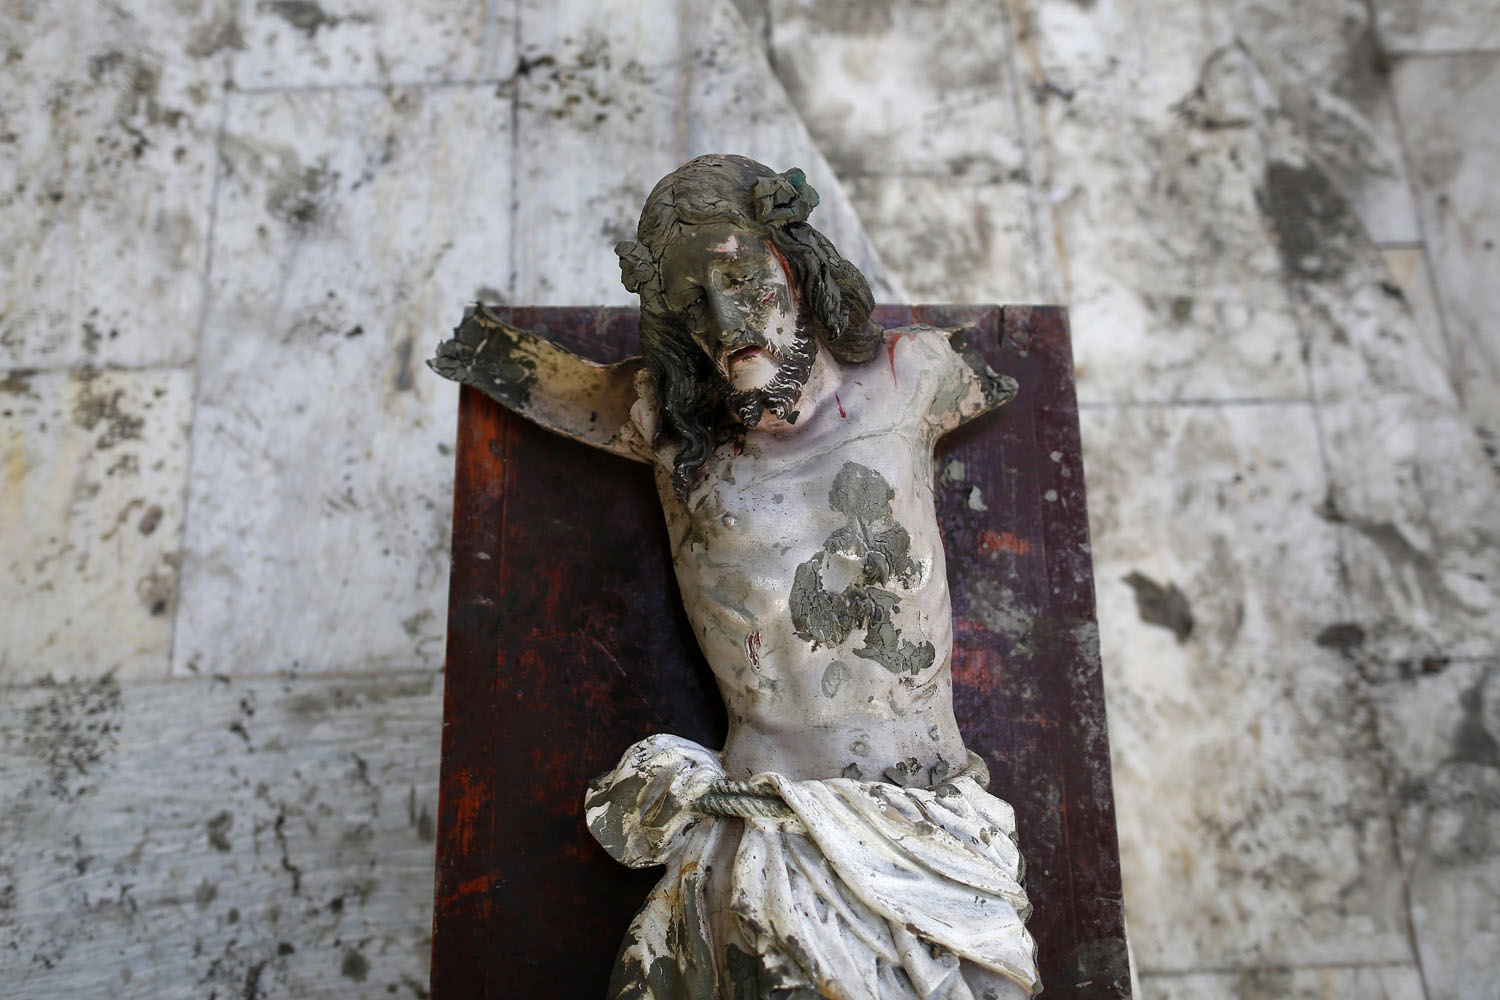 A damaged statue of Jesus Christ that was recovered from rubbles is placed in a church in an area wrecked by Typhoon Haiyan in Tacloban